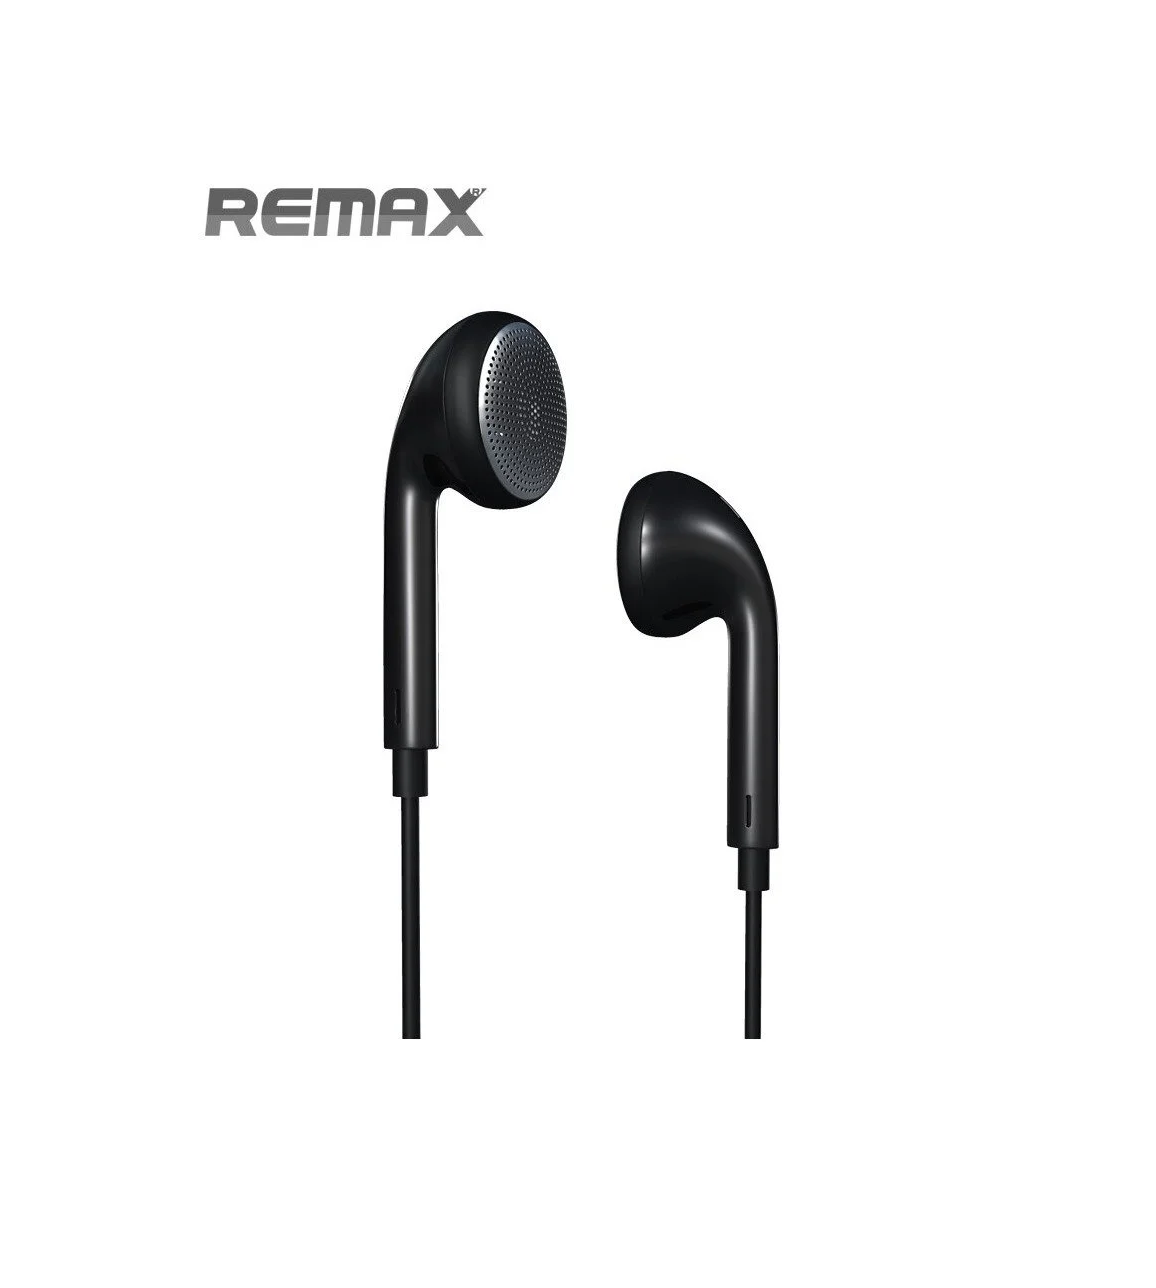 REMAX PURE MUSIC RM-303 WIRED